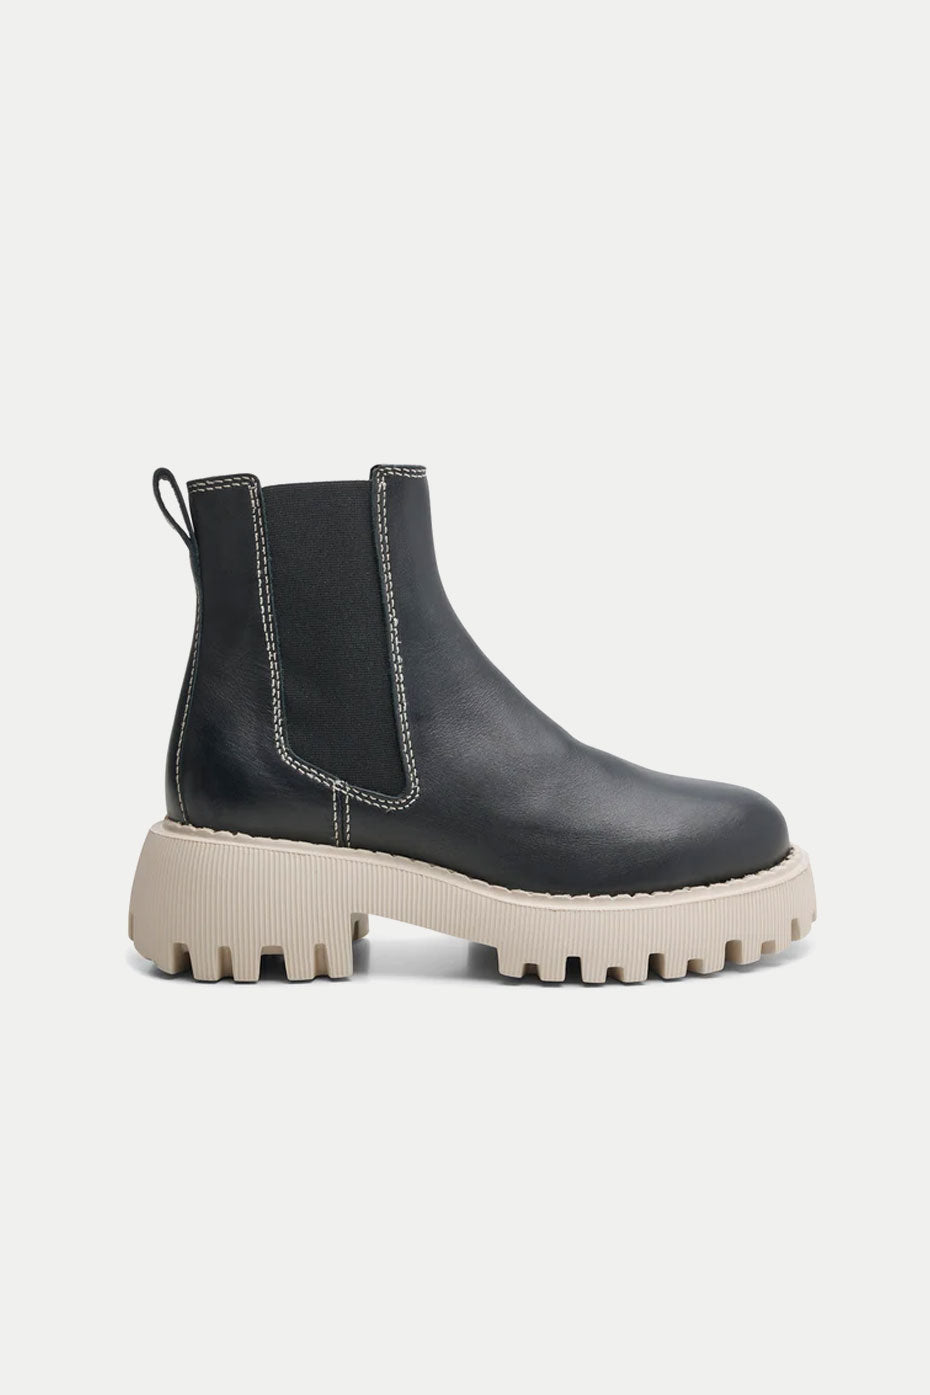 Shoe The Bear Black Contrast Posey Boot